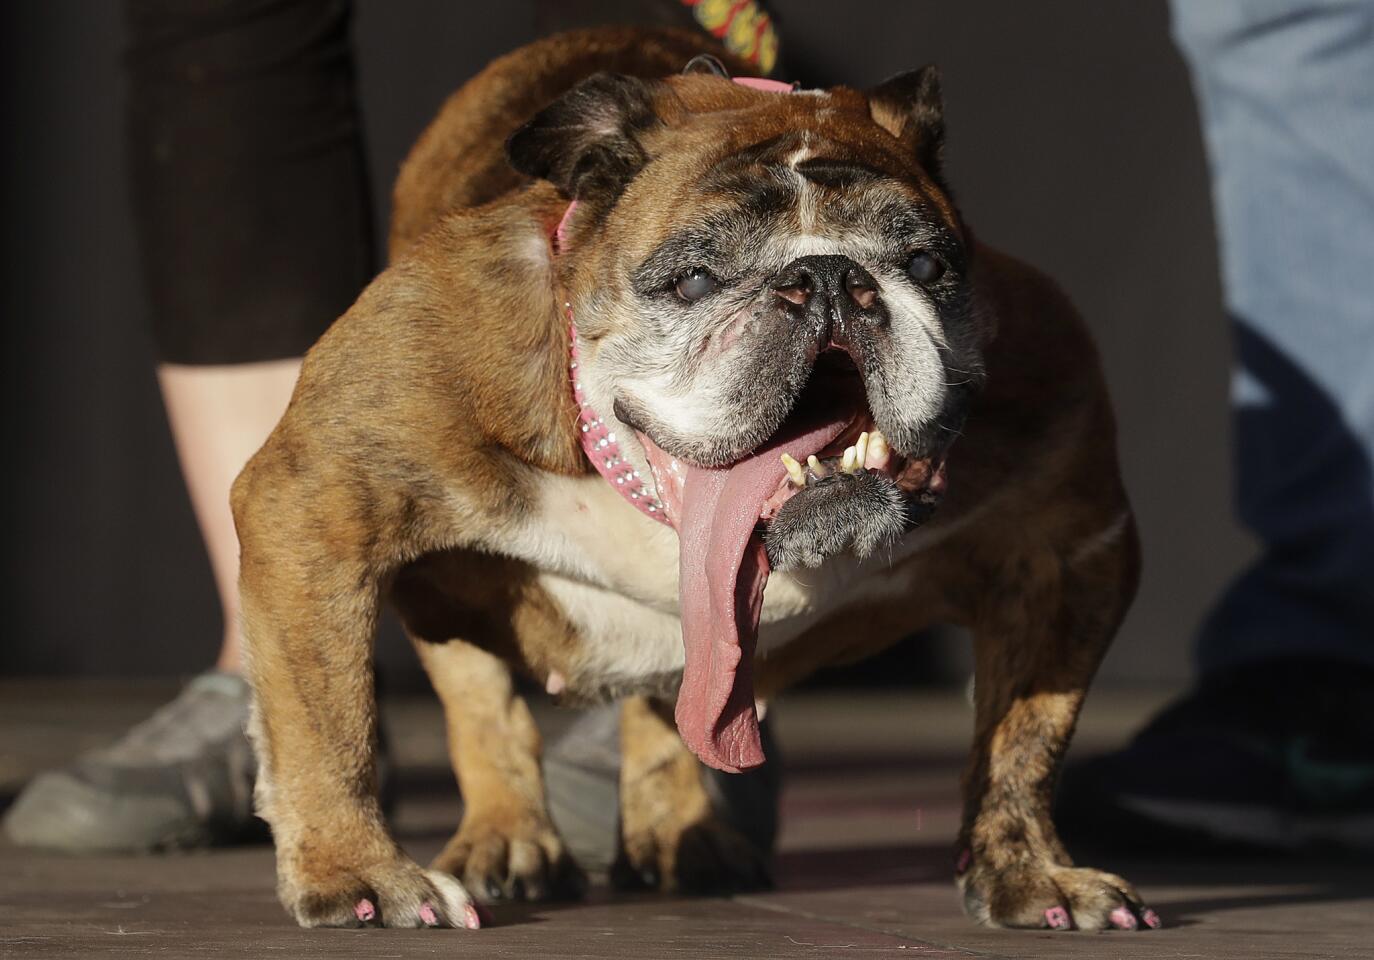 Zsa Zsa, an English Bulldog owned by Megan Brainard, stands onstage after being announced the winner of the World's Ugliest Dog Contest at the Sonoma-Marin Fair in Petaluma, Calif., June 23, 2018.